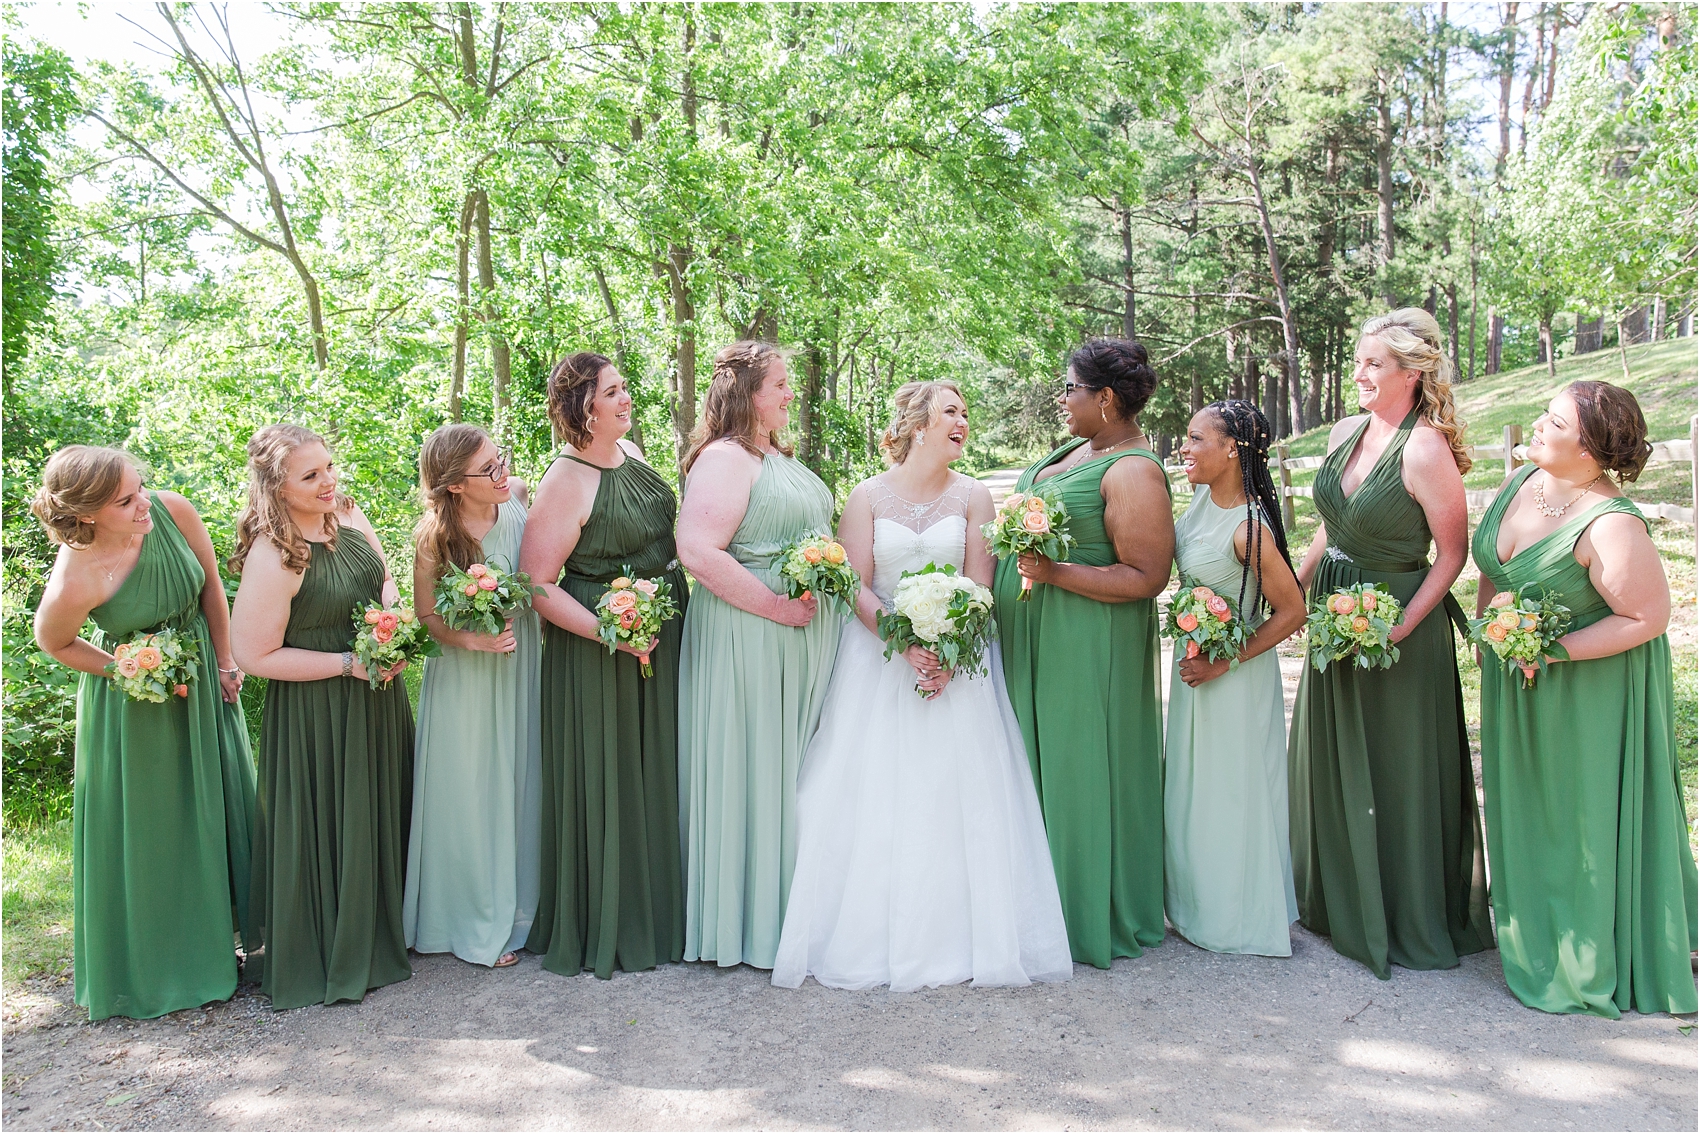 lord-of-the-rings-inspired-wedding-photos-at-crystal-gardens-in-howell-mi-by-courtney-carolyn-photography_0059.jpg